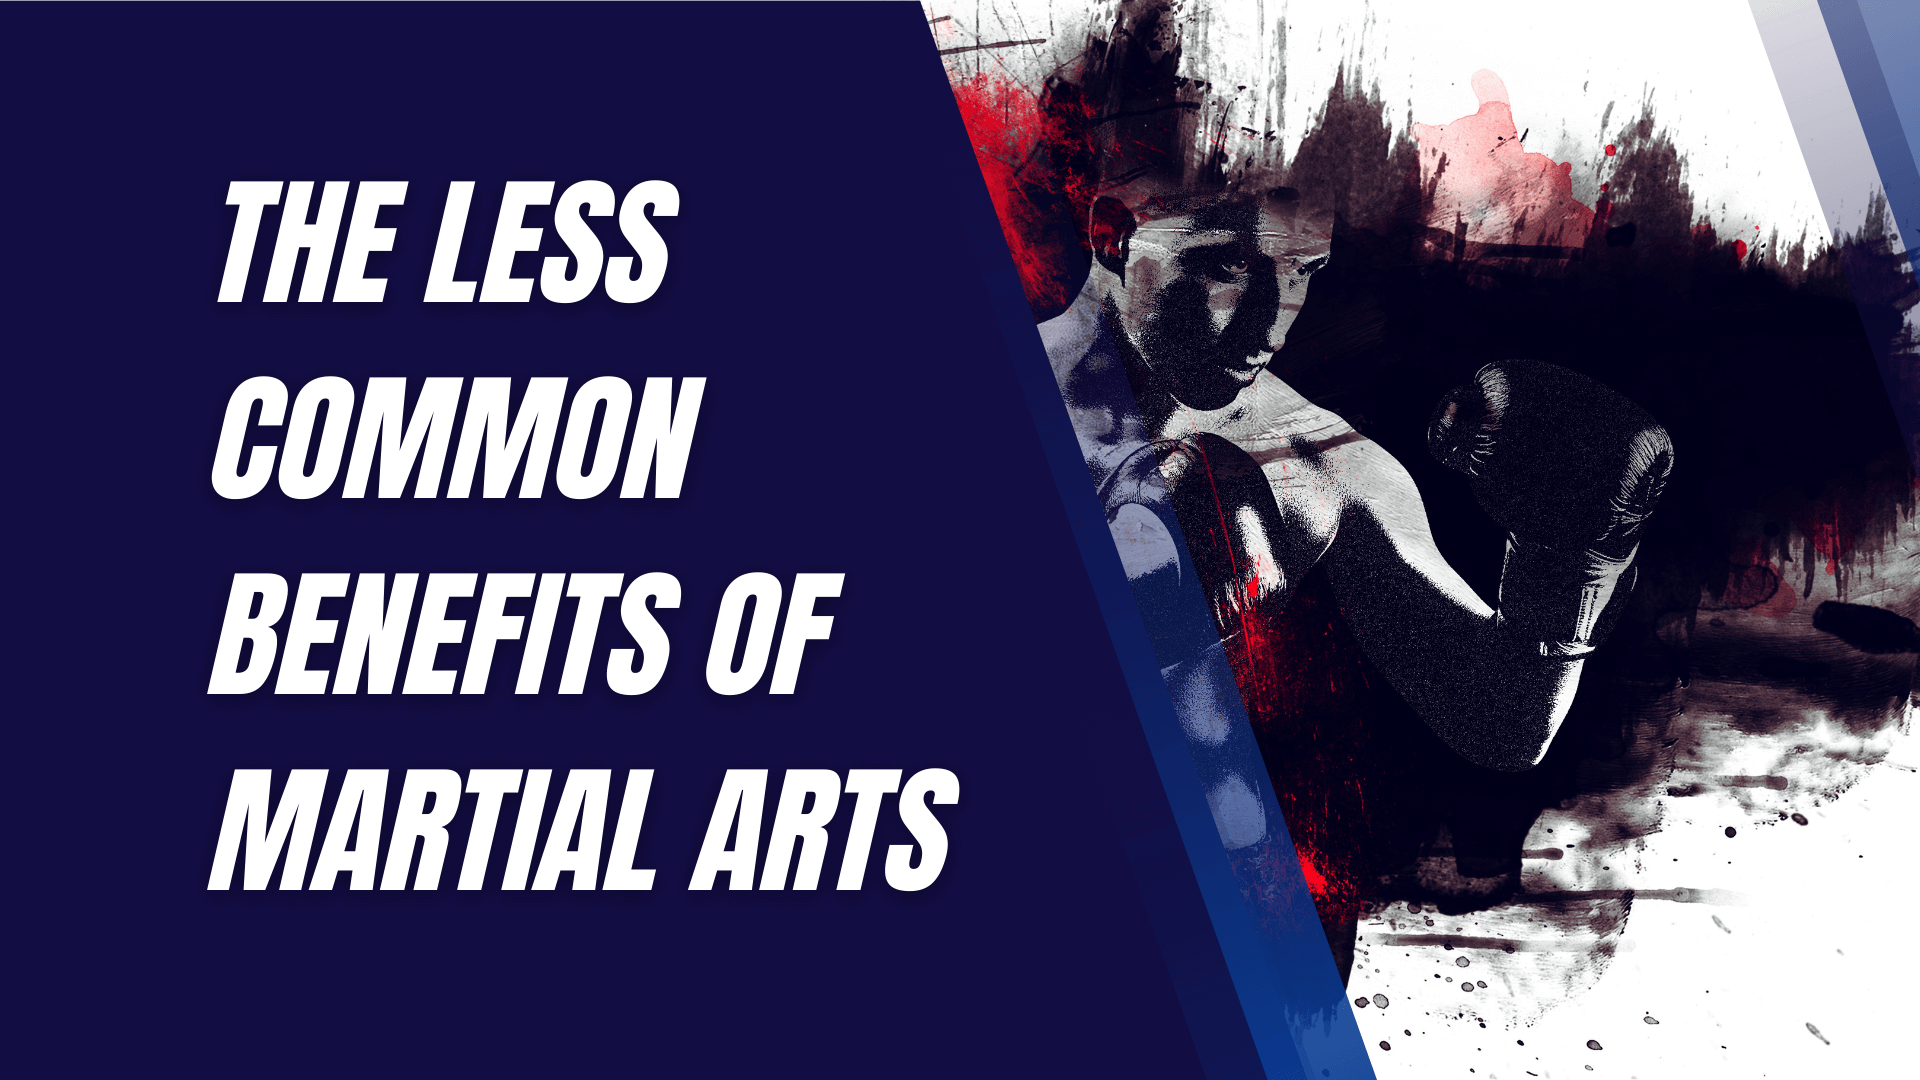 The Less Common Benefits of Martial Arts